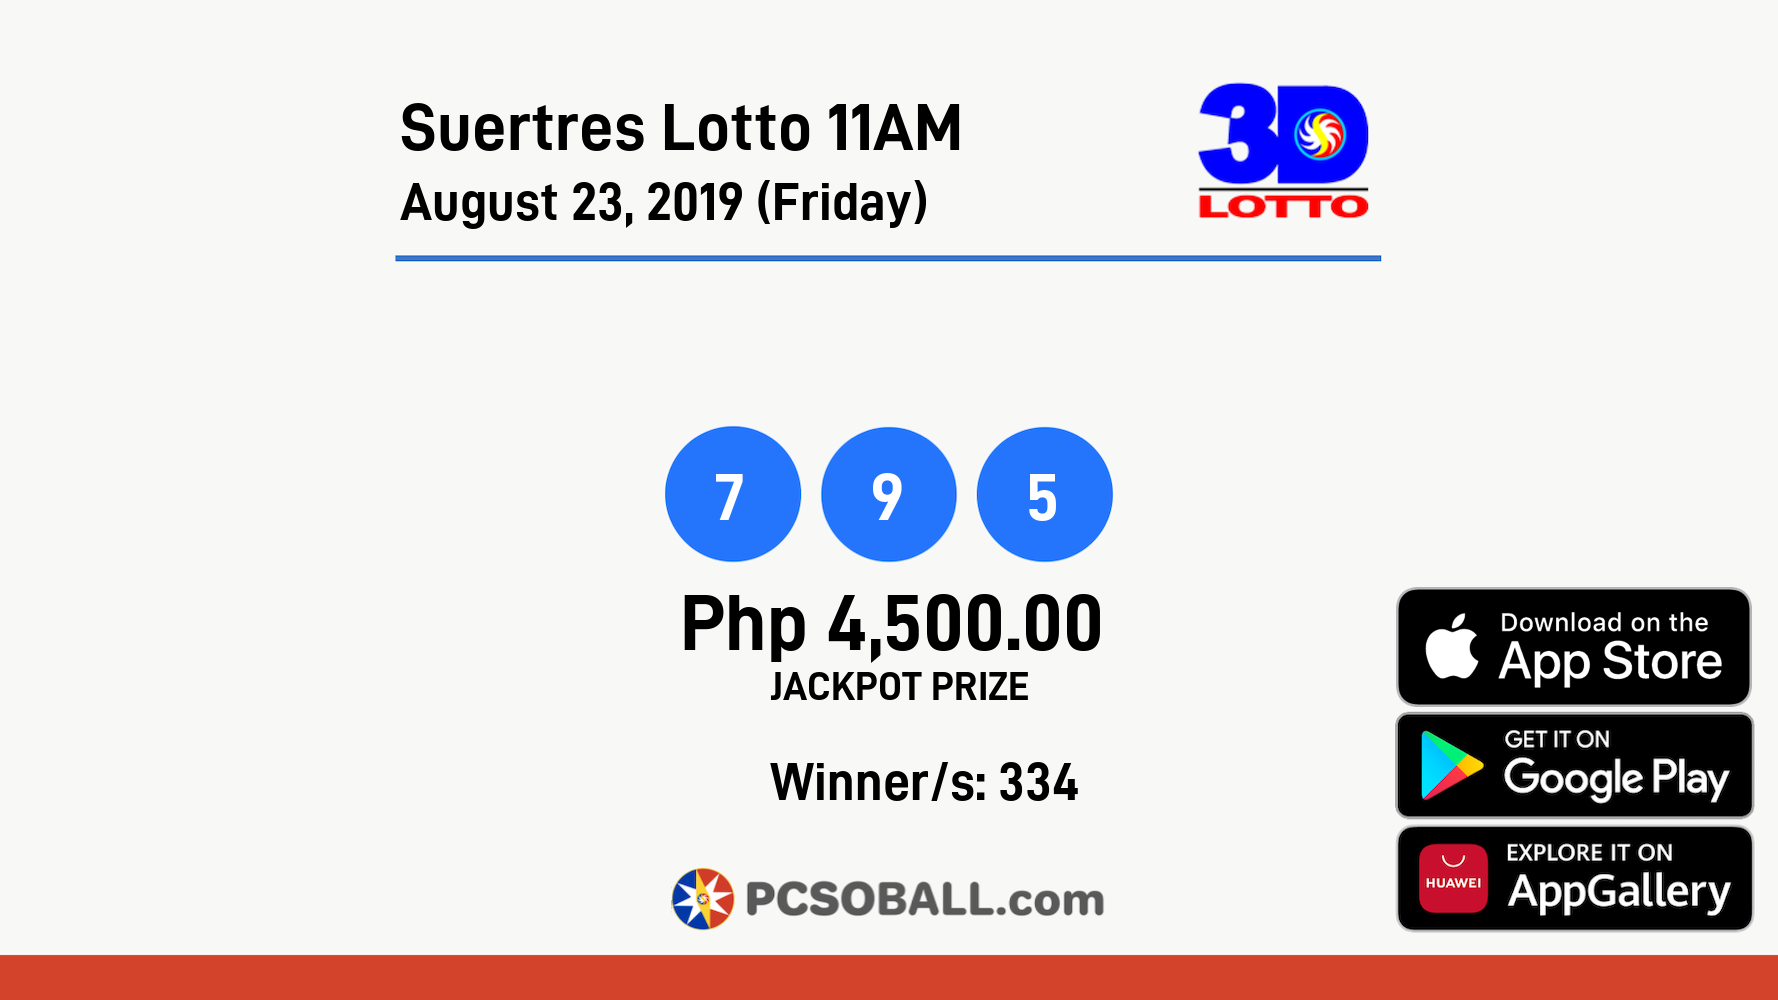 Suertres Lotto 11AM August 23, 2019 (Friday) Result